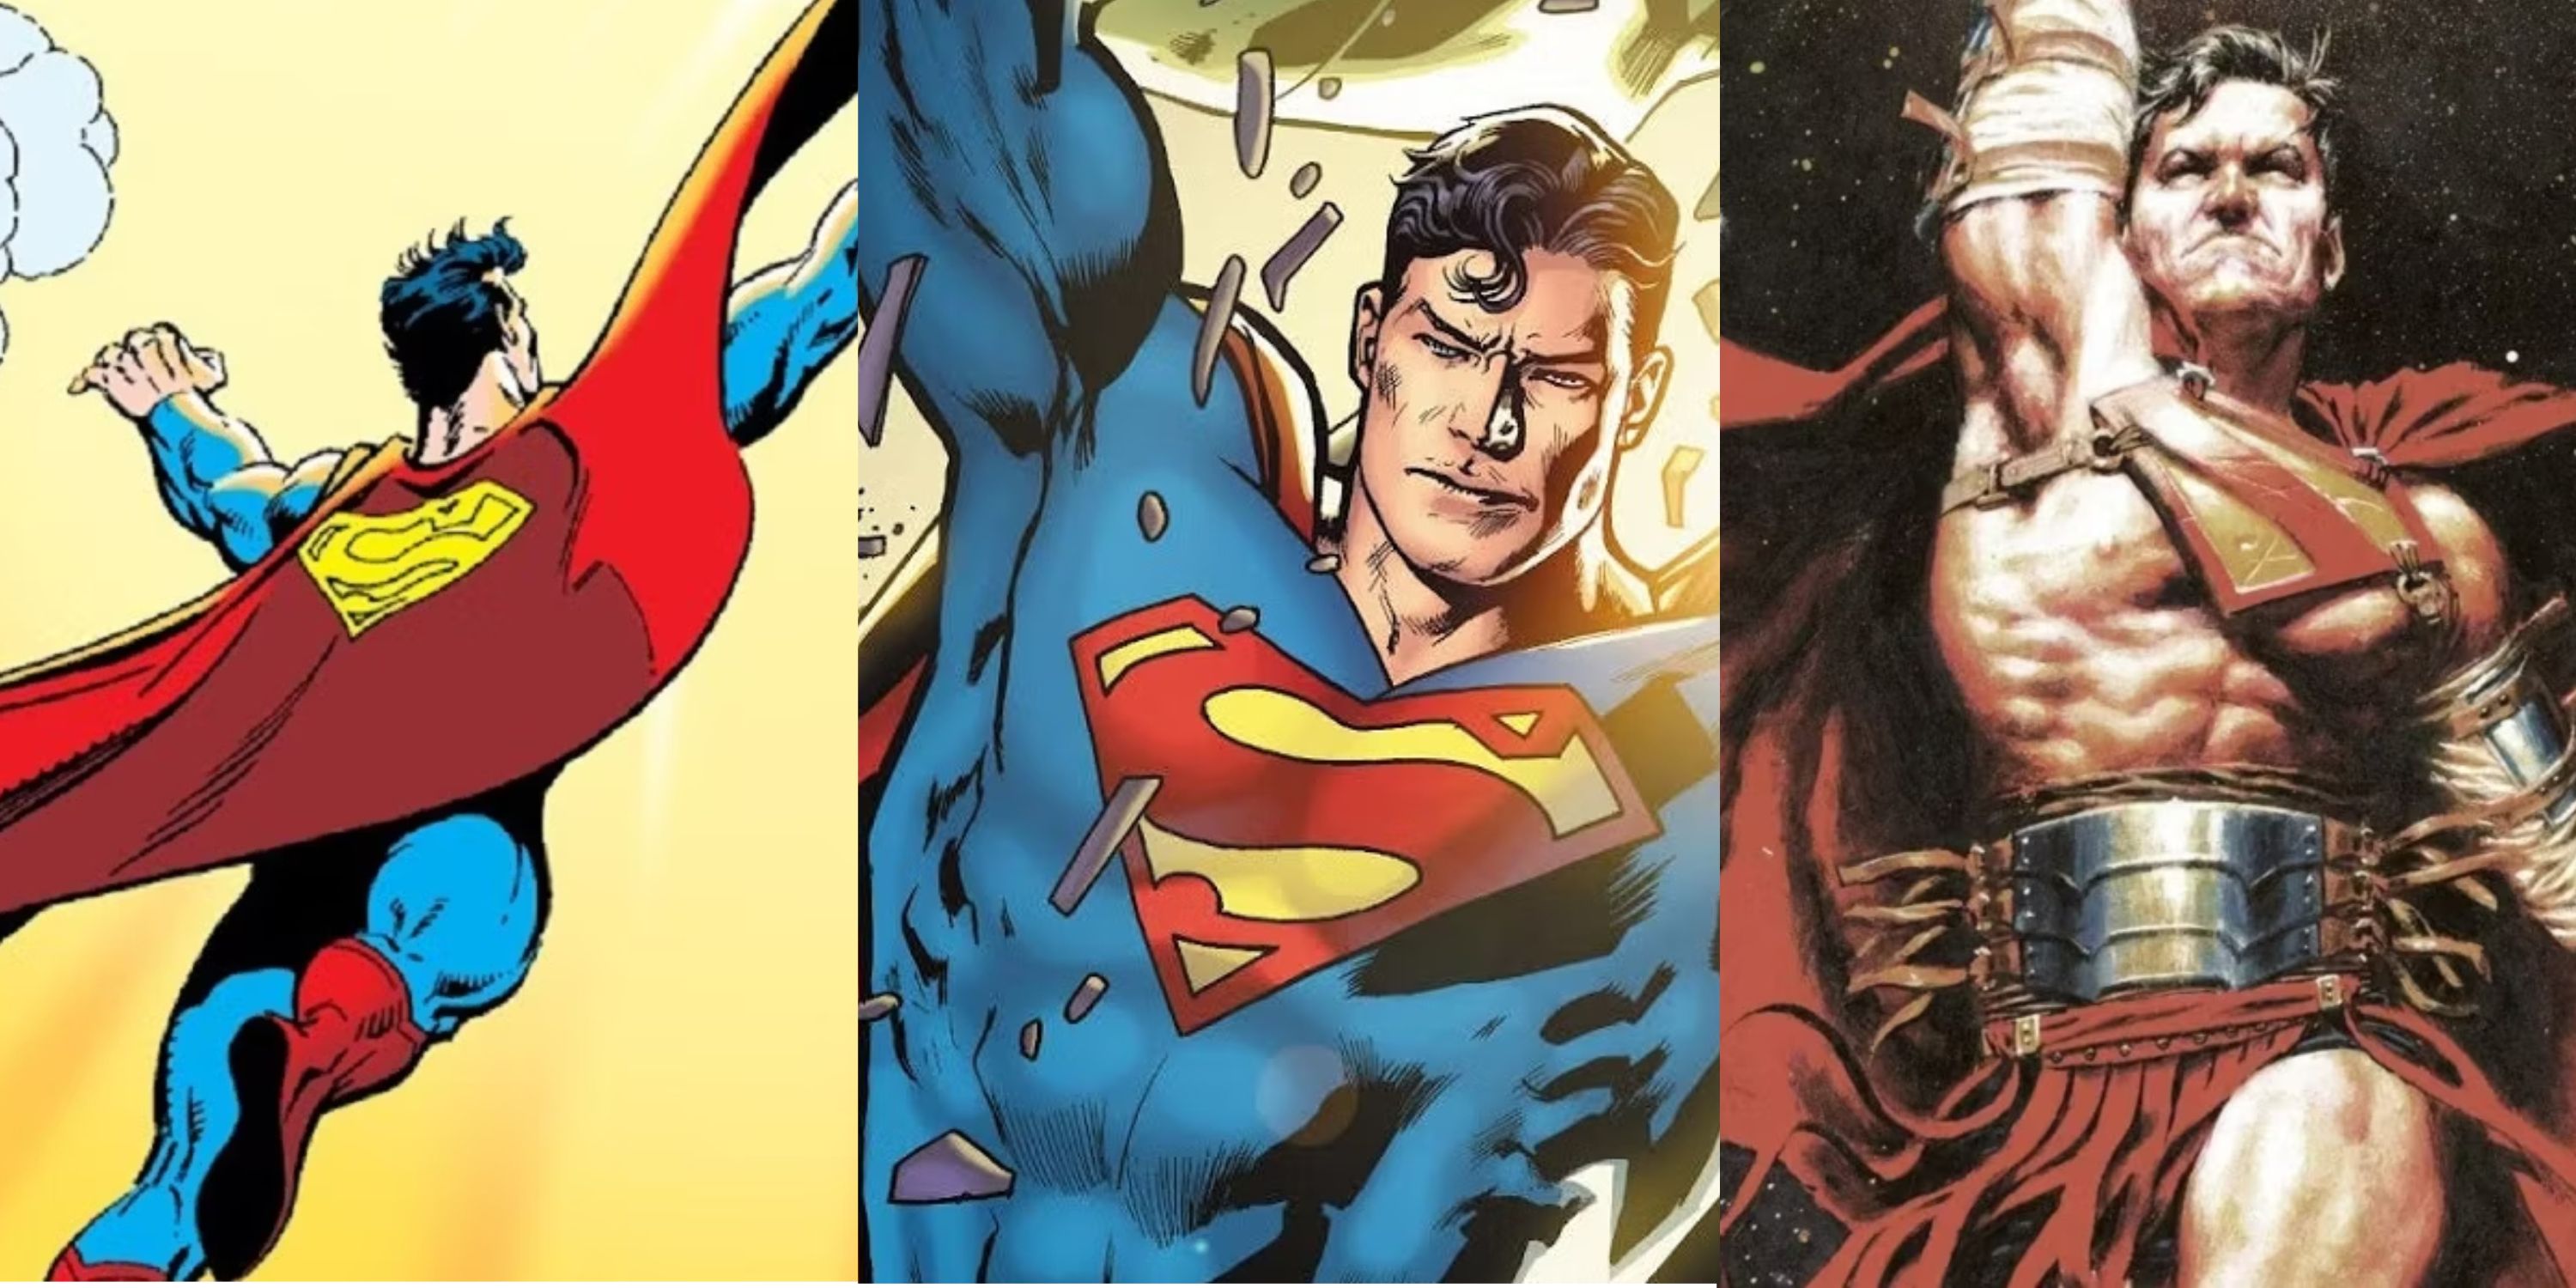 Superman is Earth's greatest defender and DC's most recognizable supernatural hero.